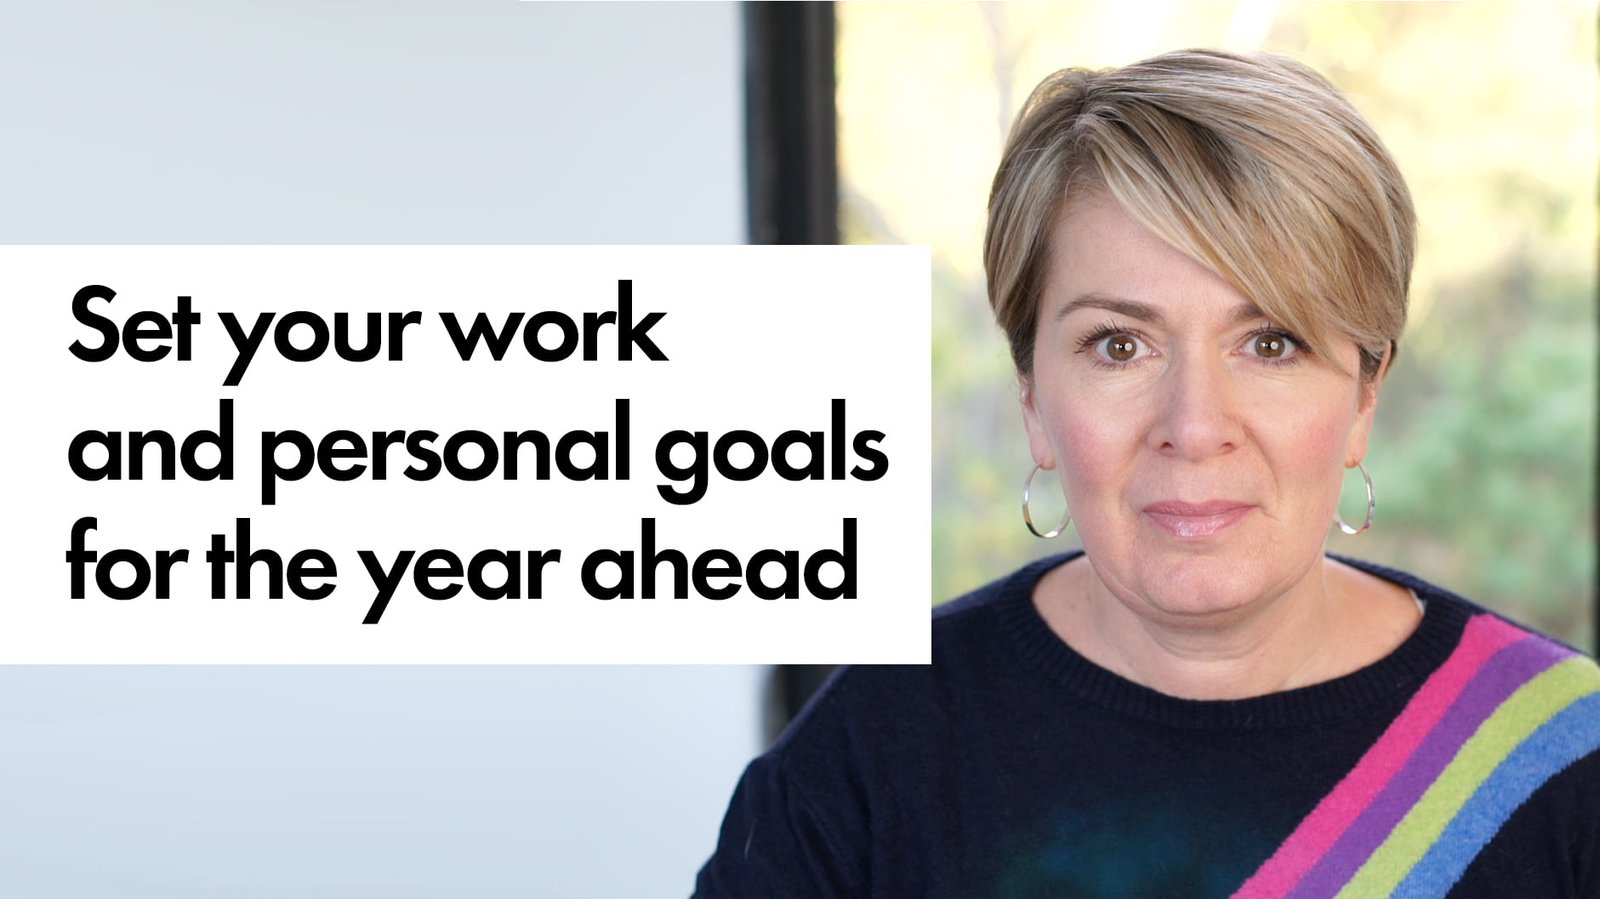 Featured image for “Set your work and personal goals for the year ahead”